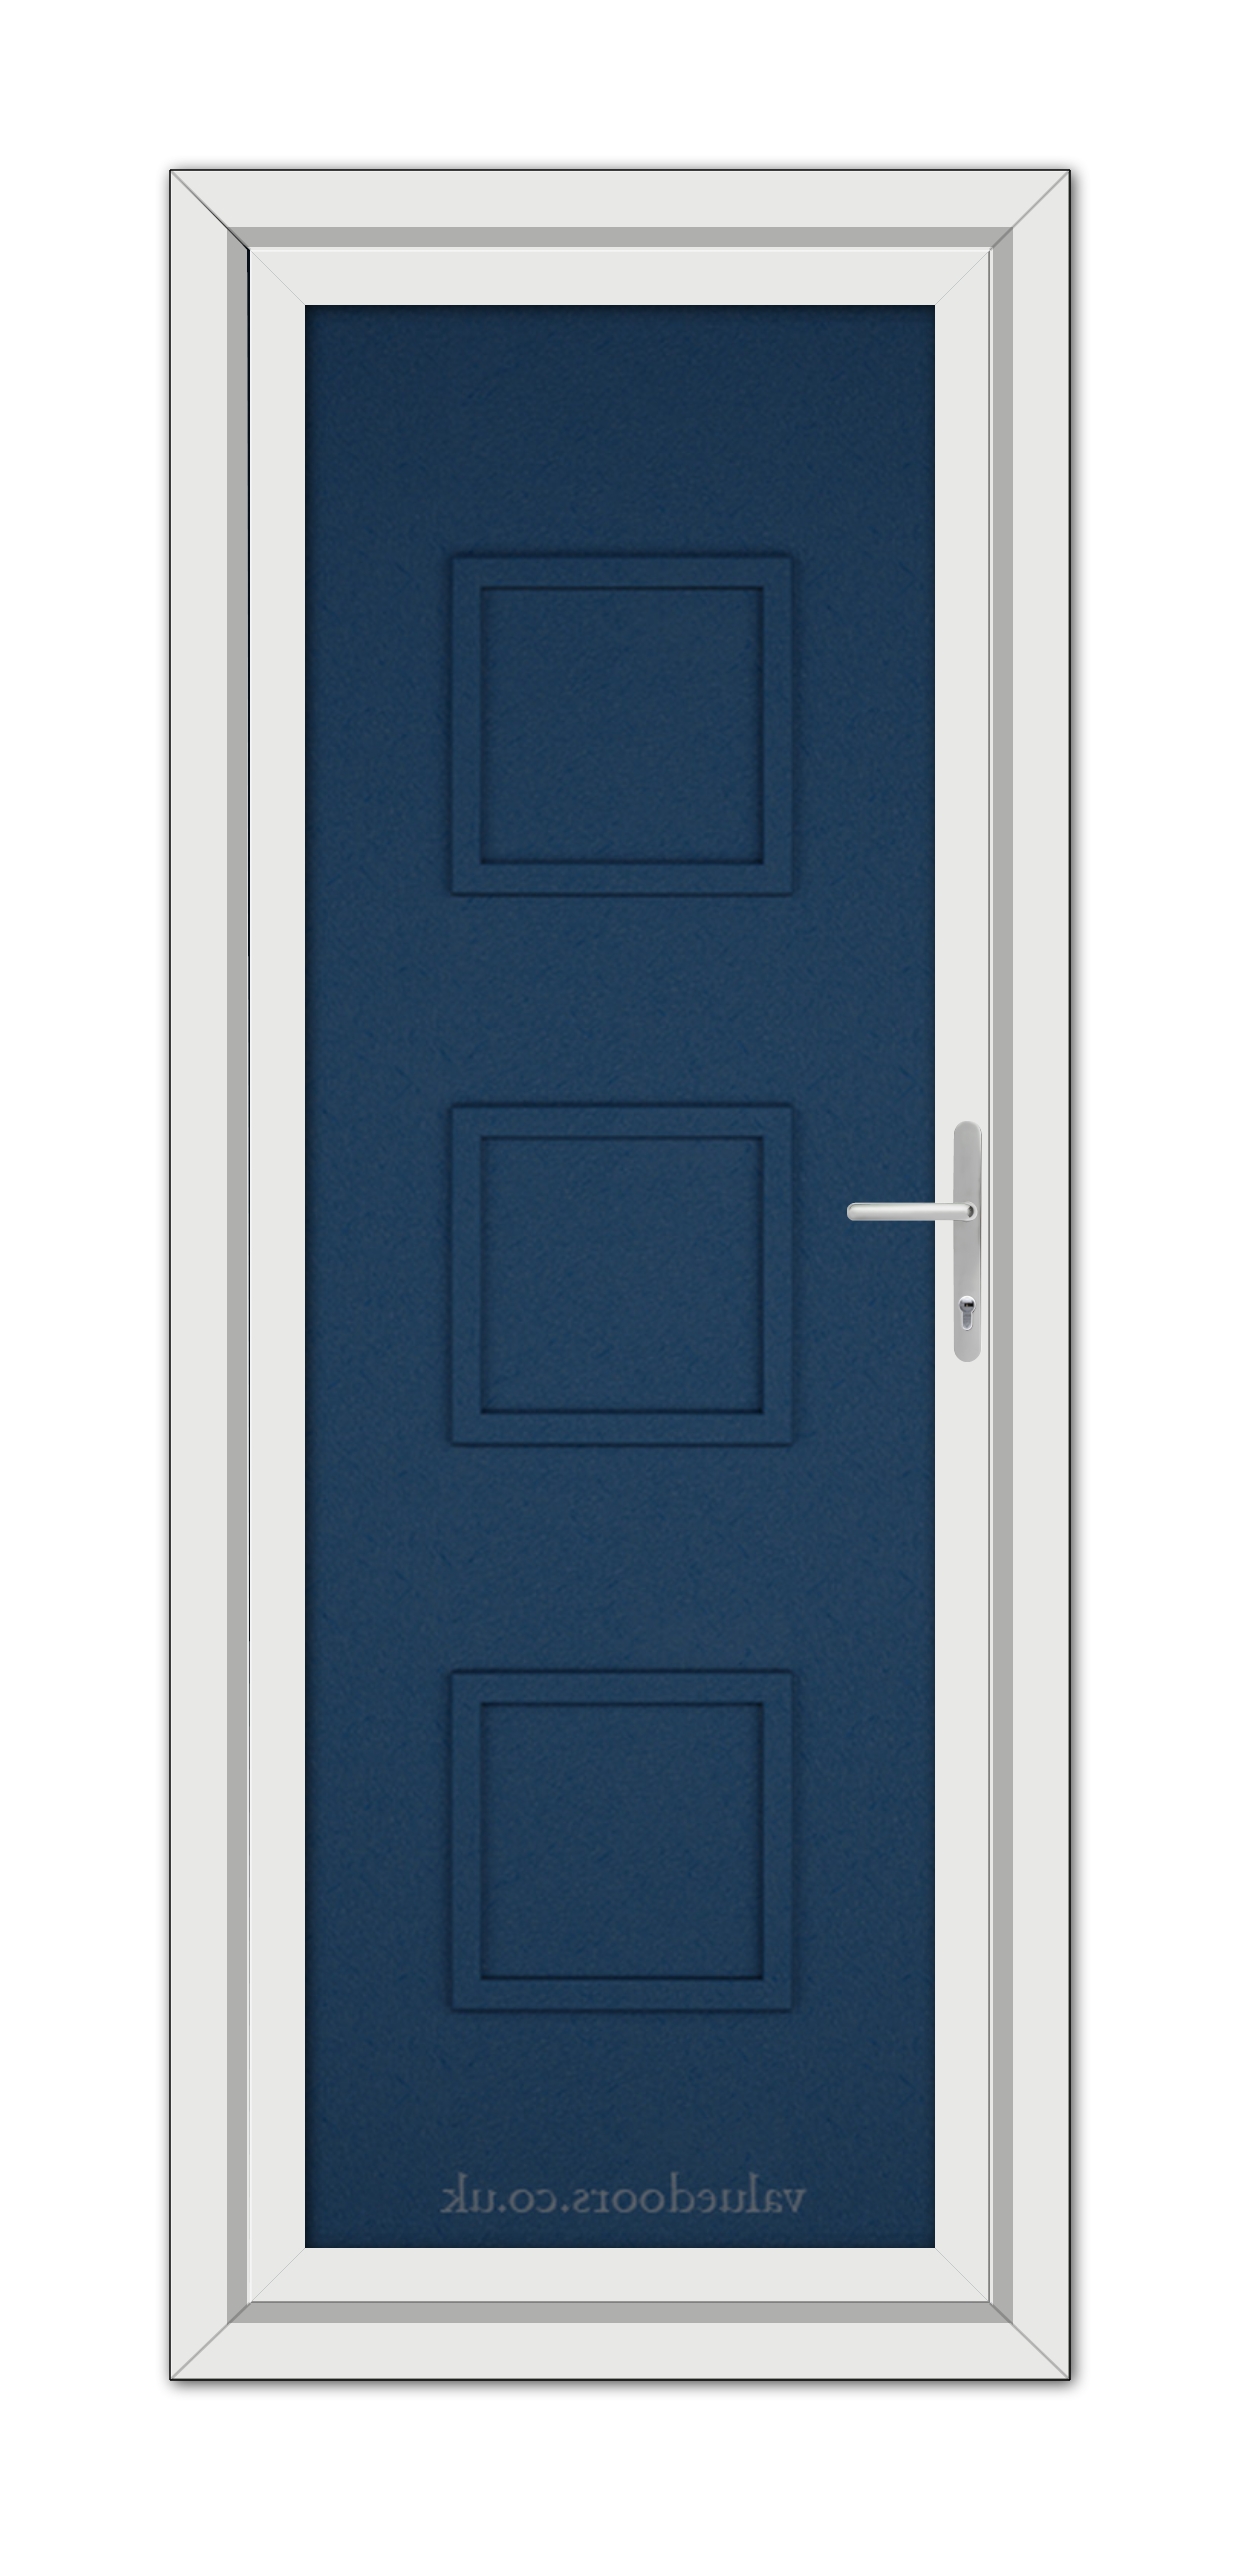 A vertical image of a Blue Modern 5013 Solid uPVC Door with four rectangular panels, featuring a silver handle on the right, set within a white door frame.